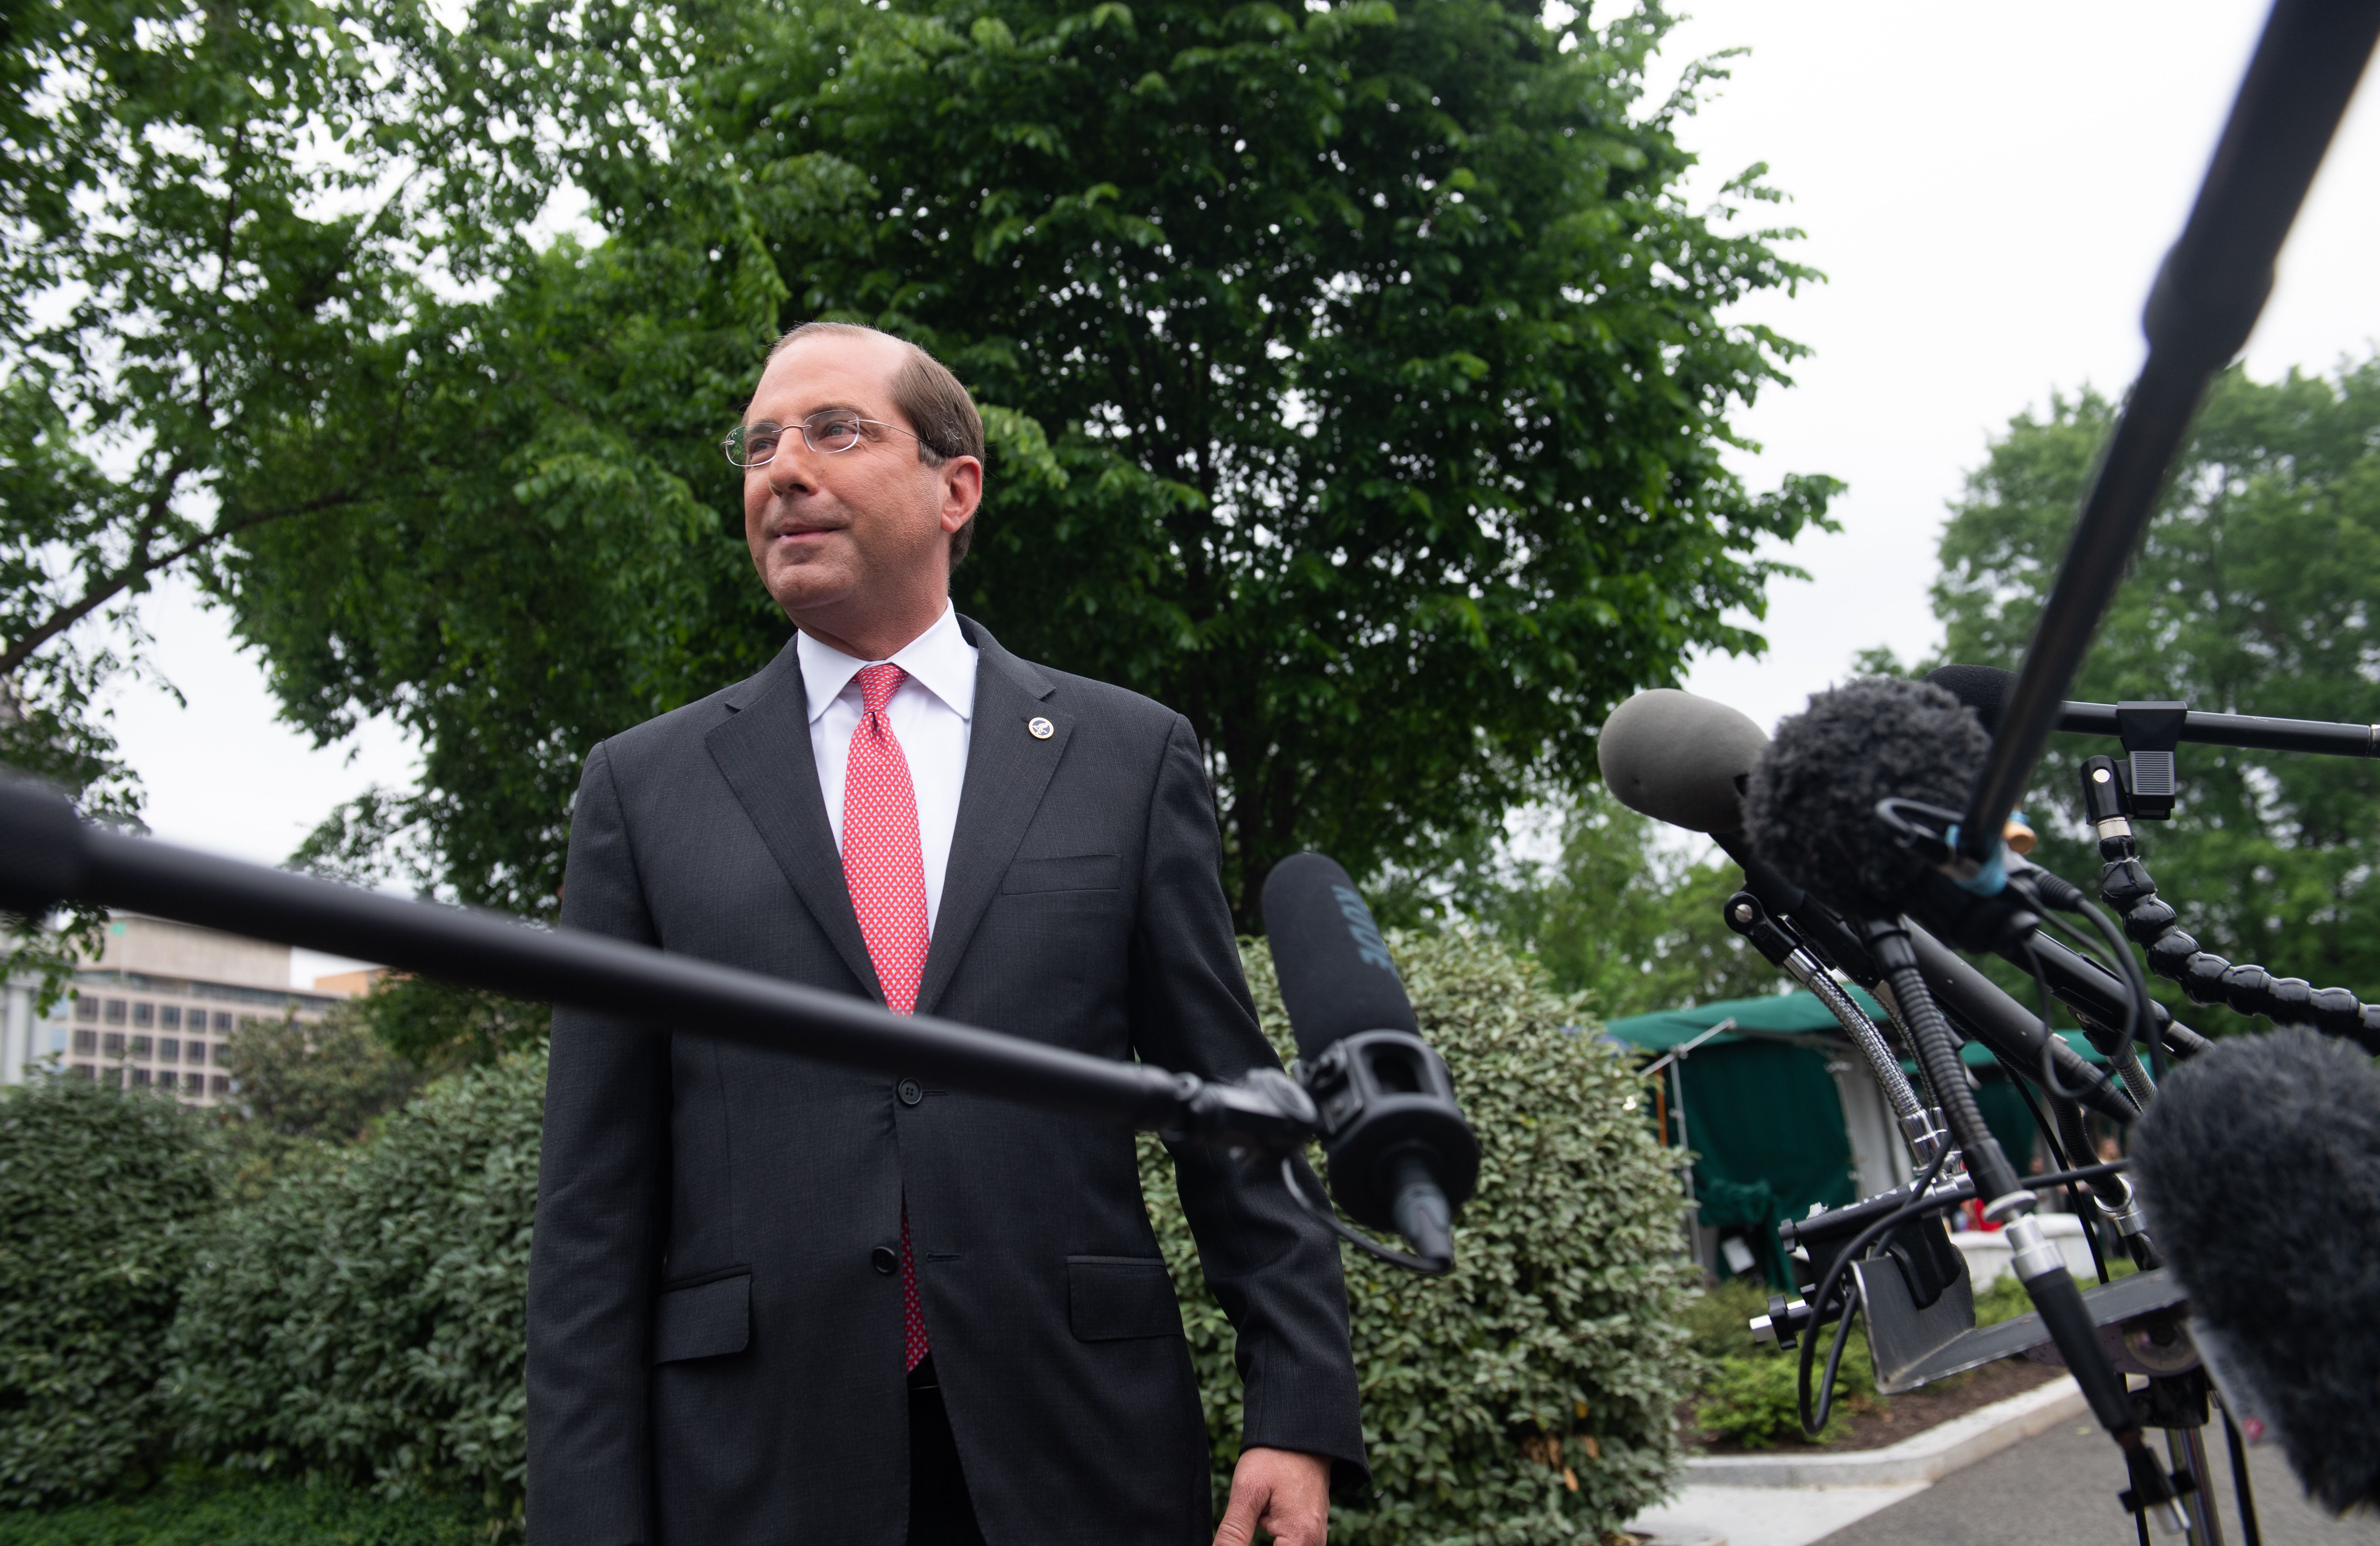 Alex Azar, Secretary of Health and Human Services, speaks to the press in the driveway of the White House in Washington, DC, May 8, 2019. (Photo by SAUL LOEB/AFP/Getty Images)